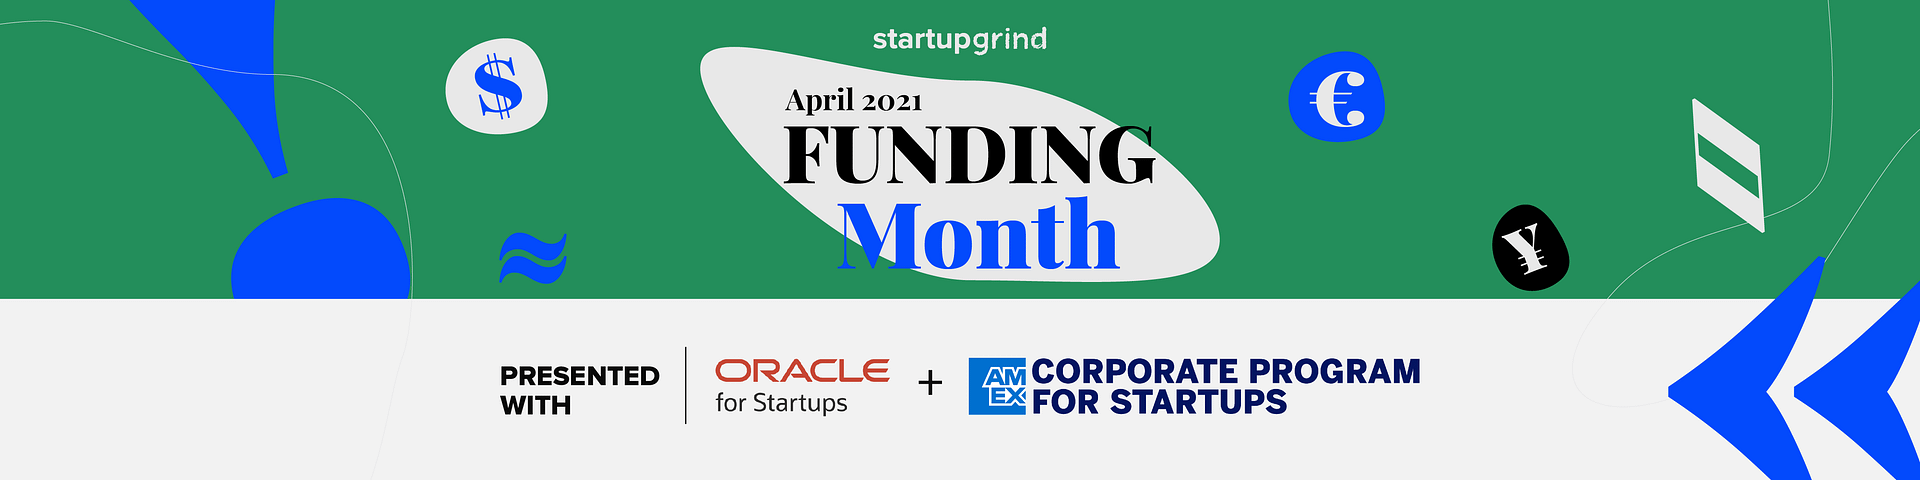 April 2021 Funding Month presented with Oracle for Startups and American Express Corporate Program for Startups